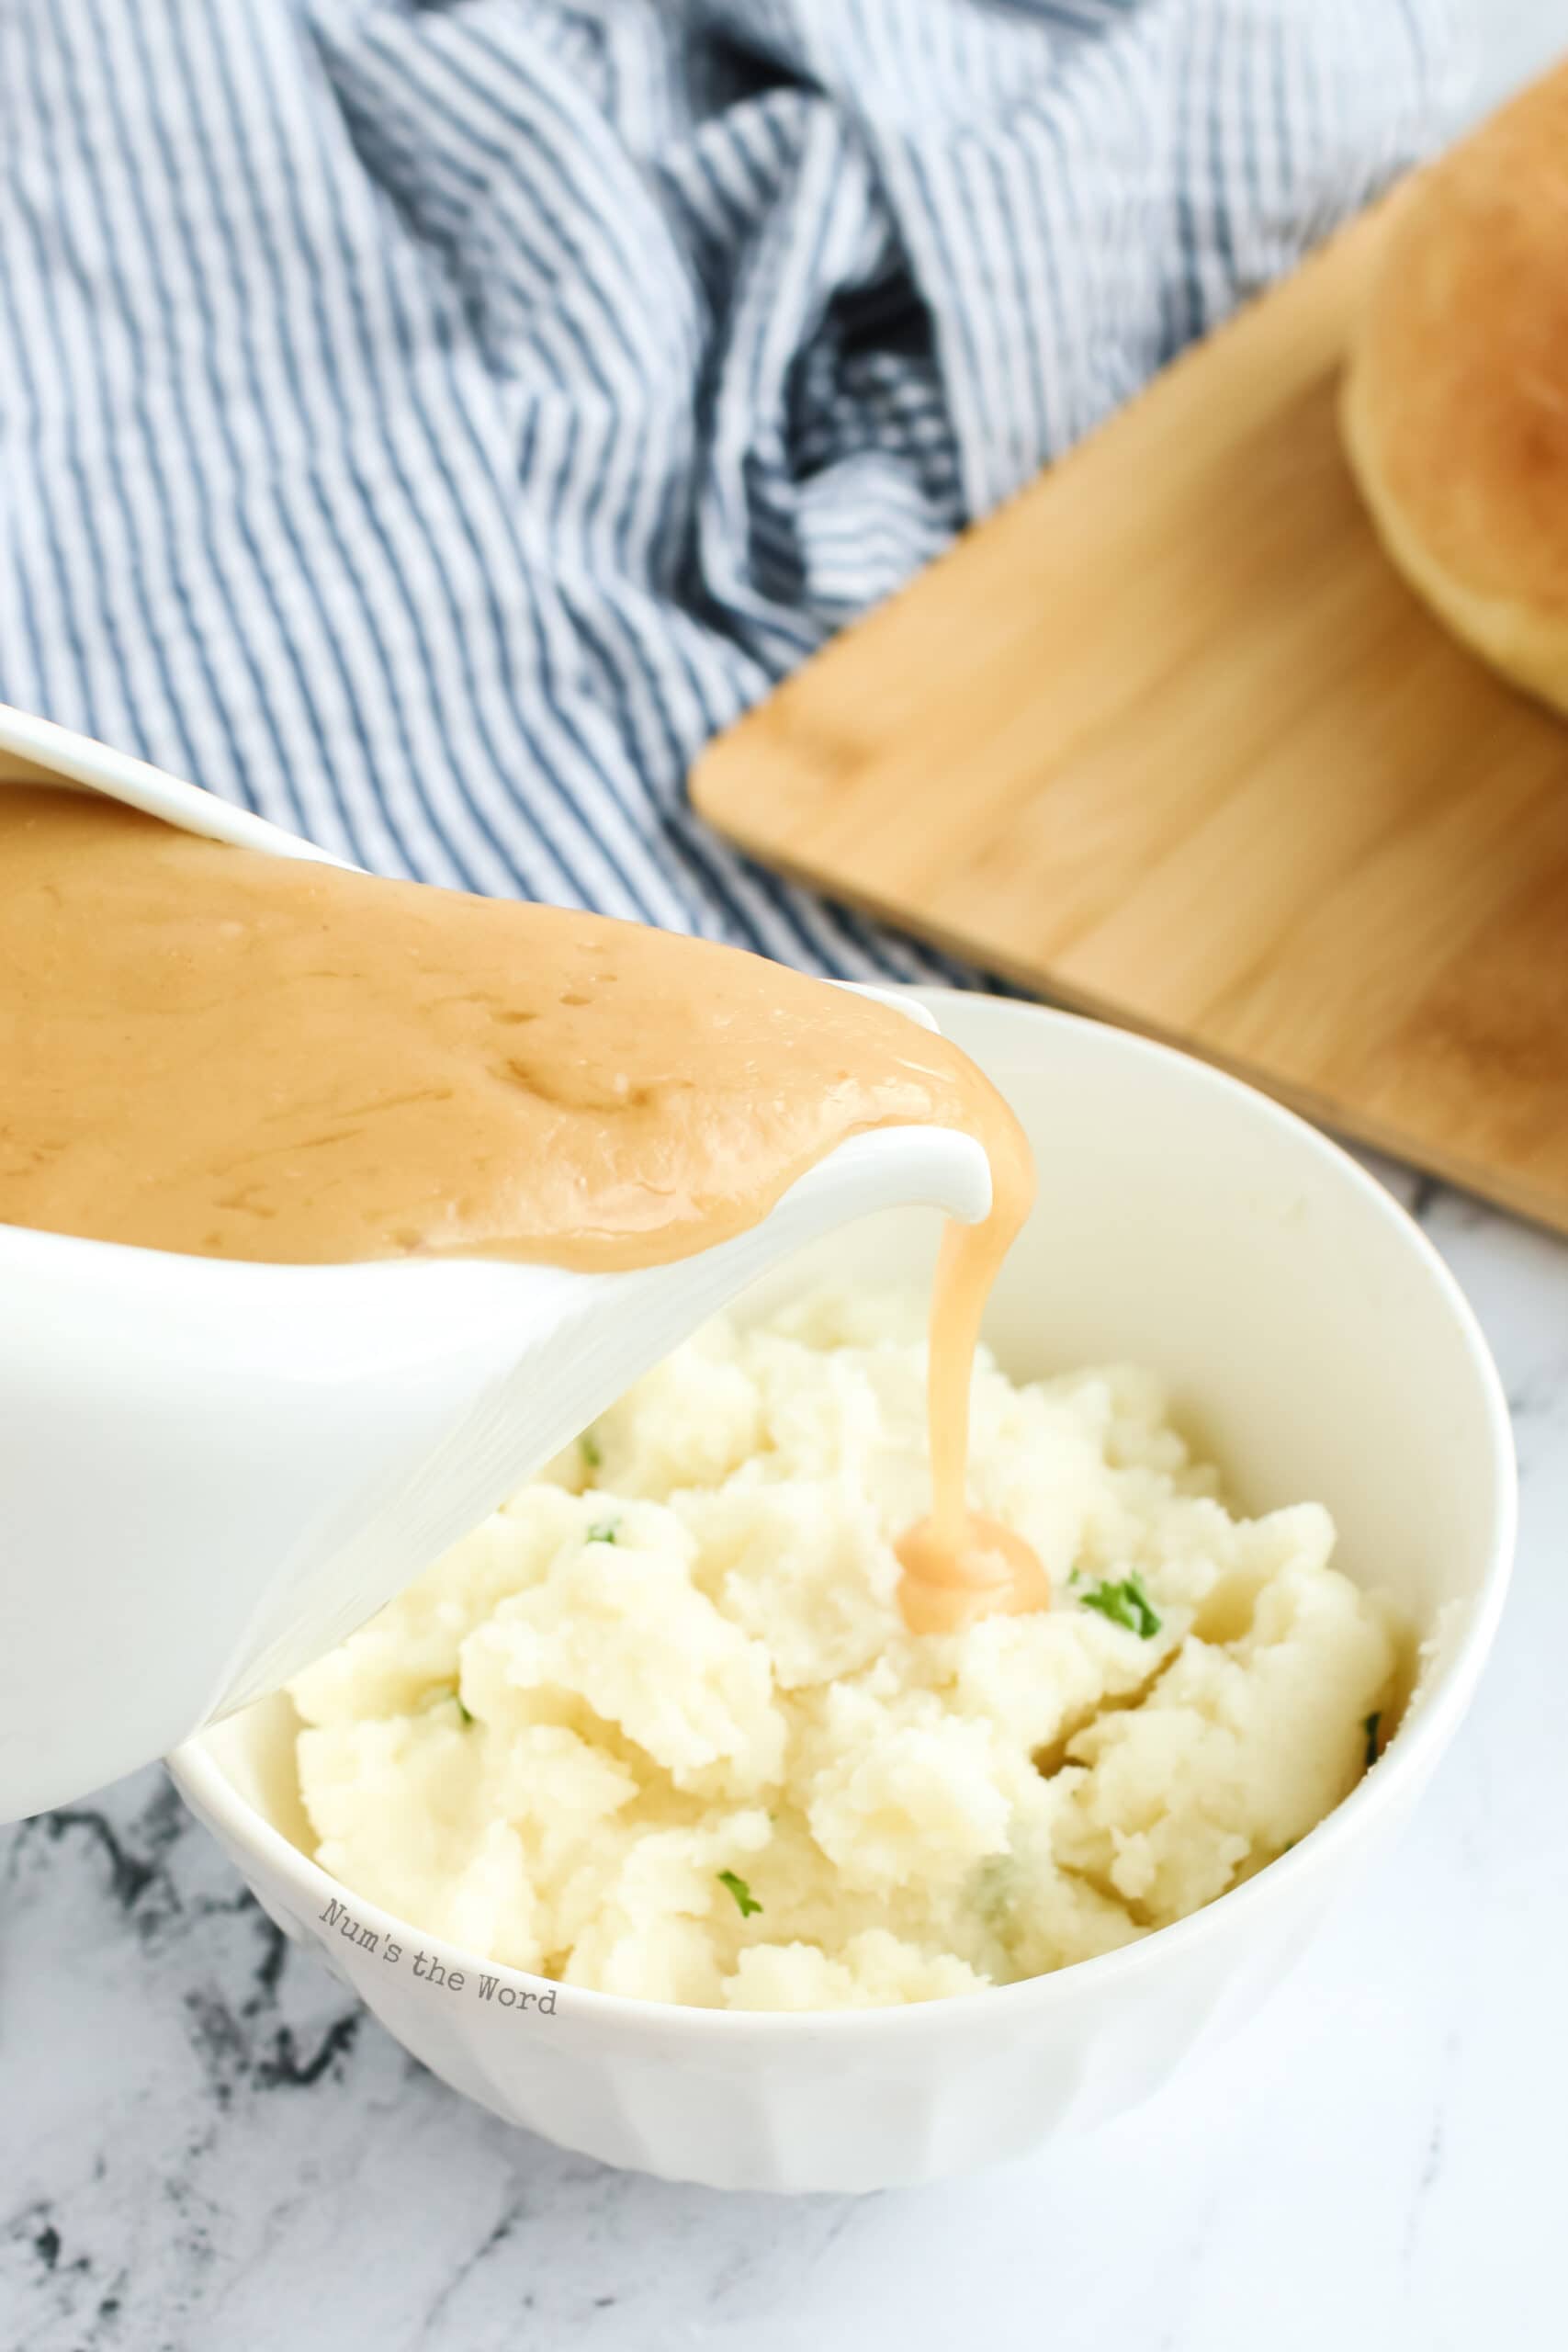 gravy being poured over mashed potatoes